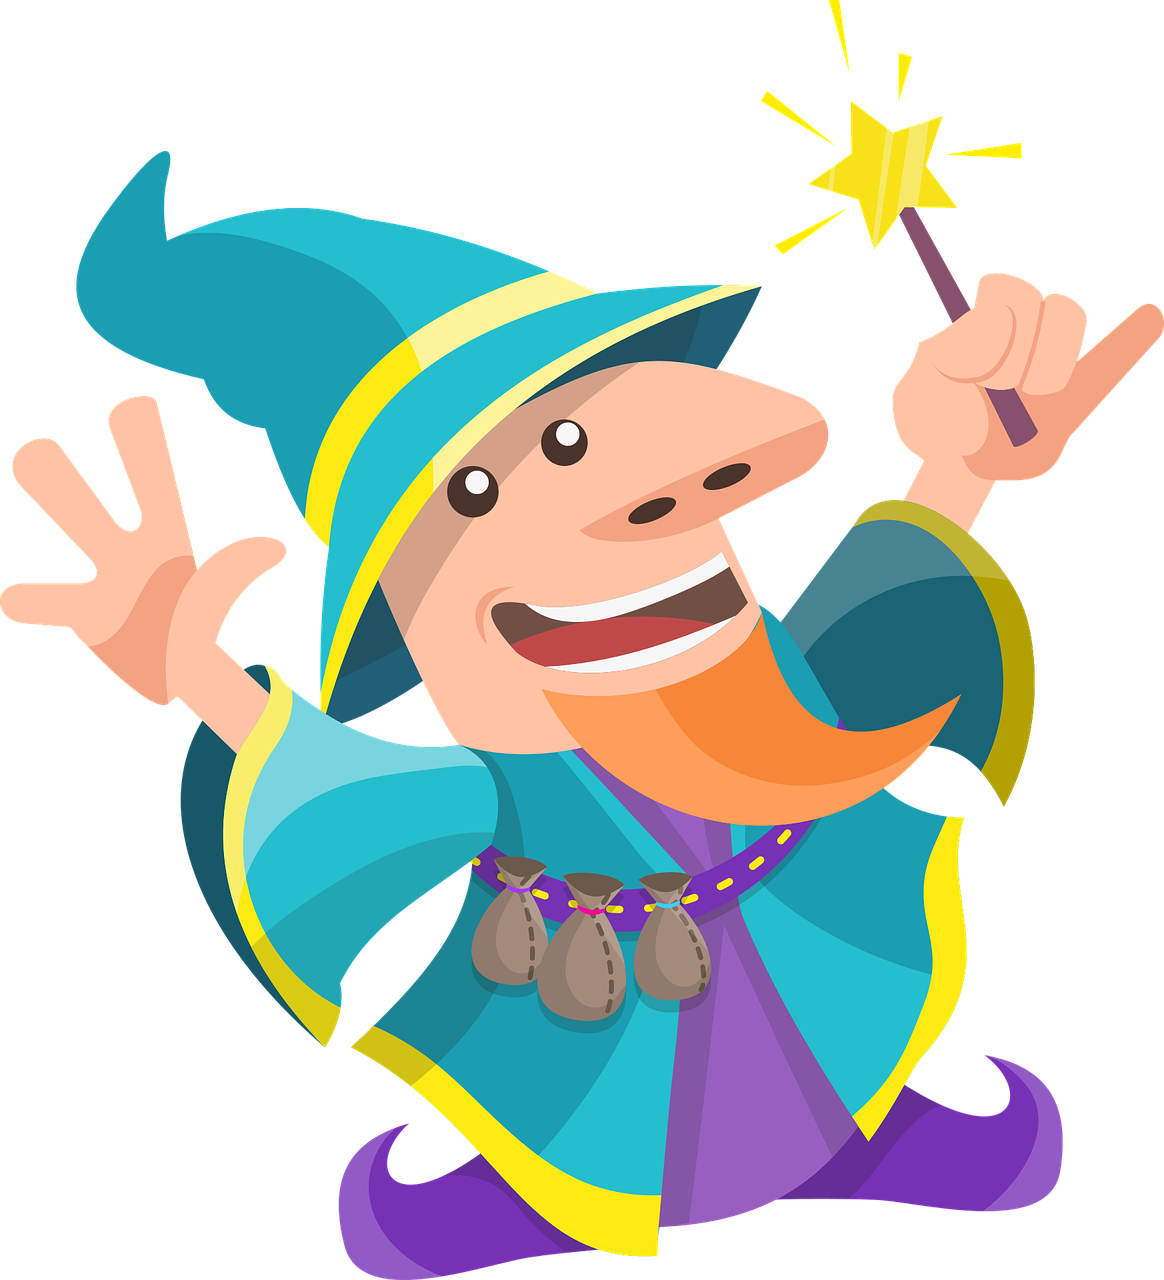 Magic hands magician or holding Royalty Free Vector Image